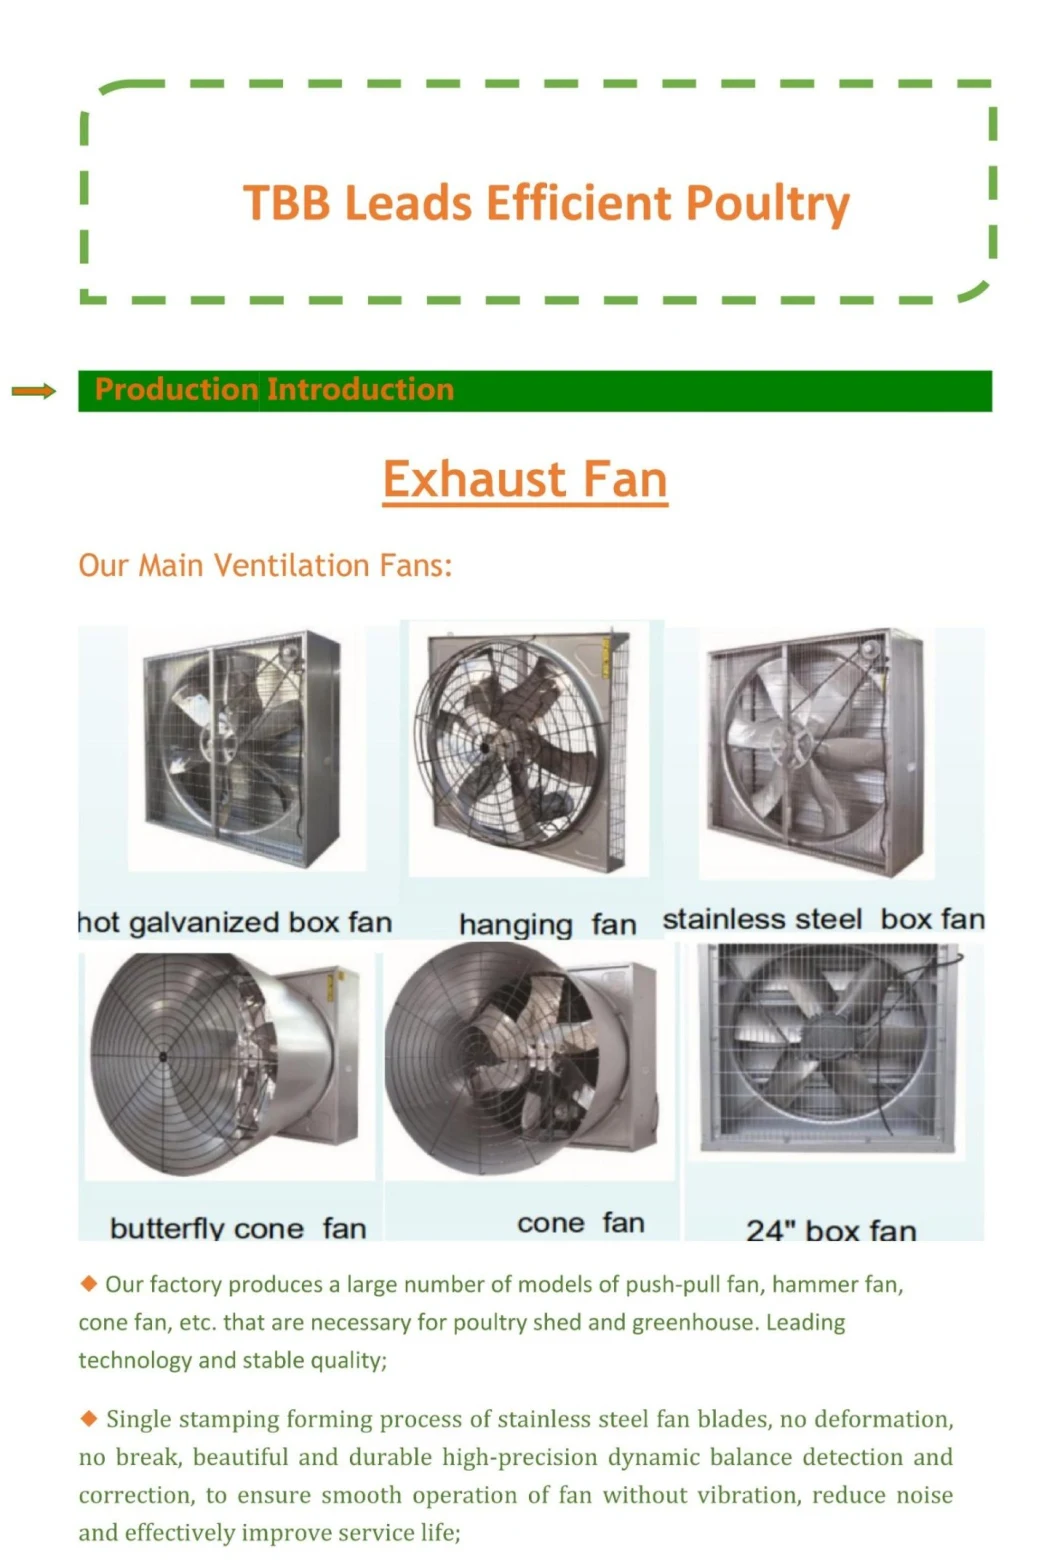 Modern and Advanced Poultry Ventilation Exhaust Fan for Poulty Houses/Chicken House